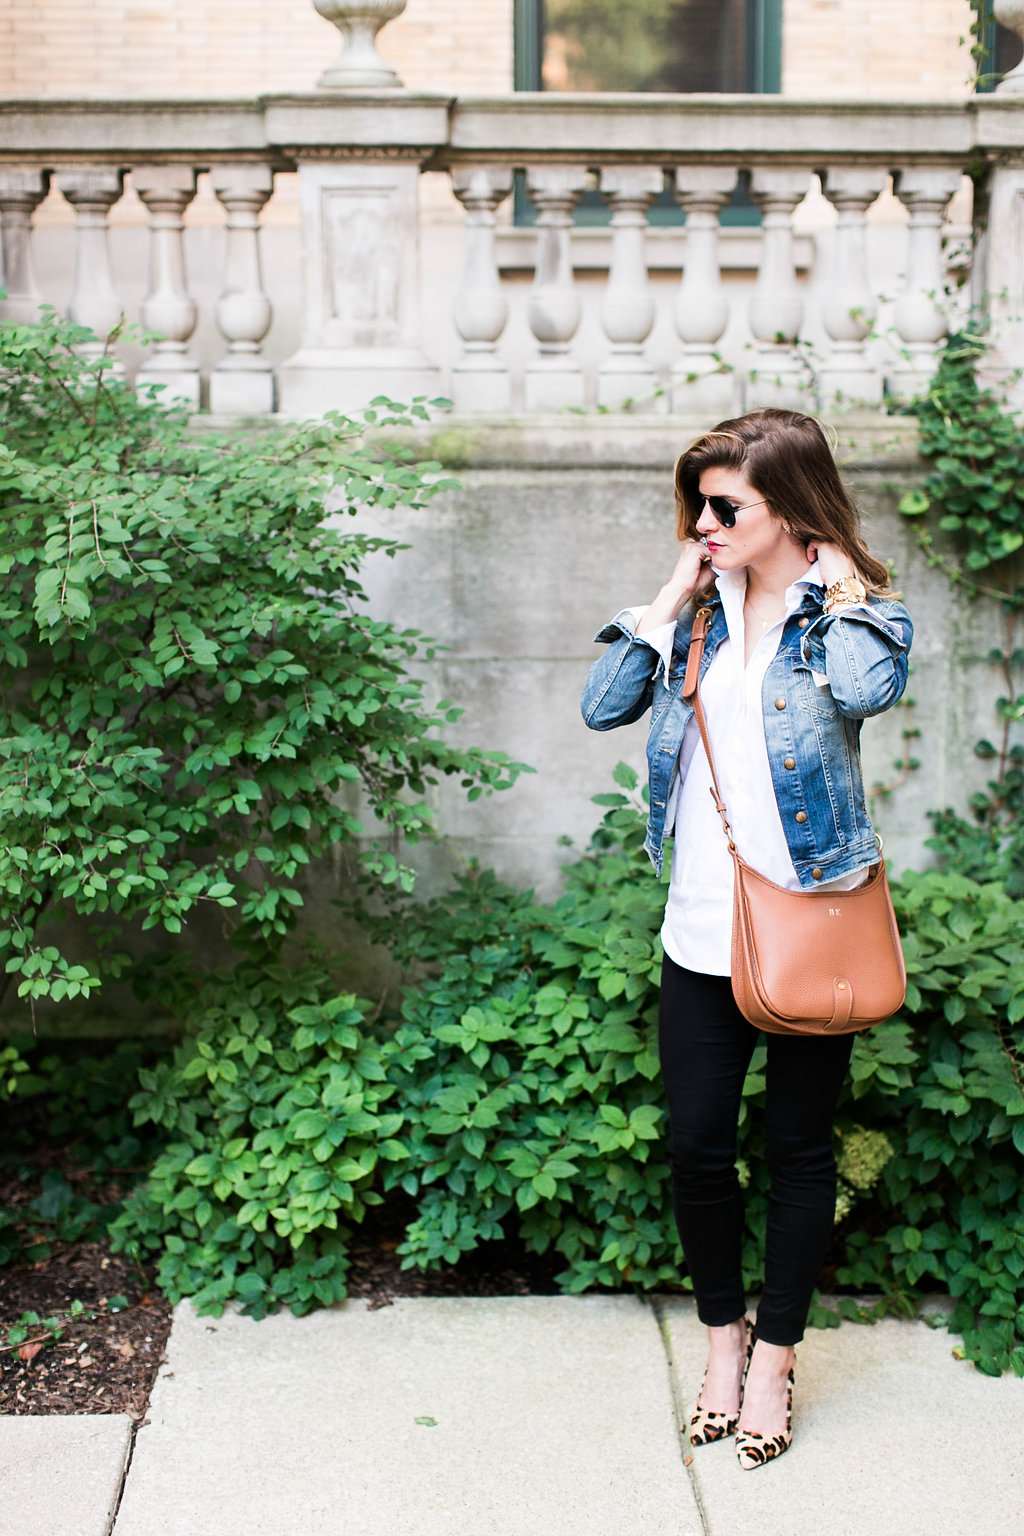 What to Wear with a Jean Jacket - Chic Fall Outfit Combo